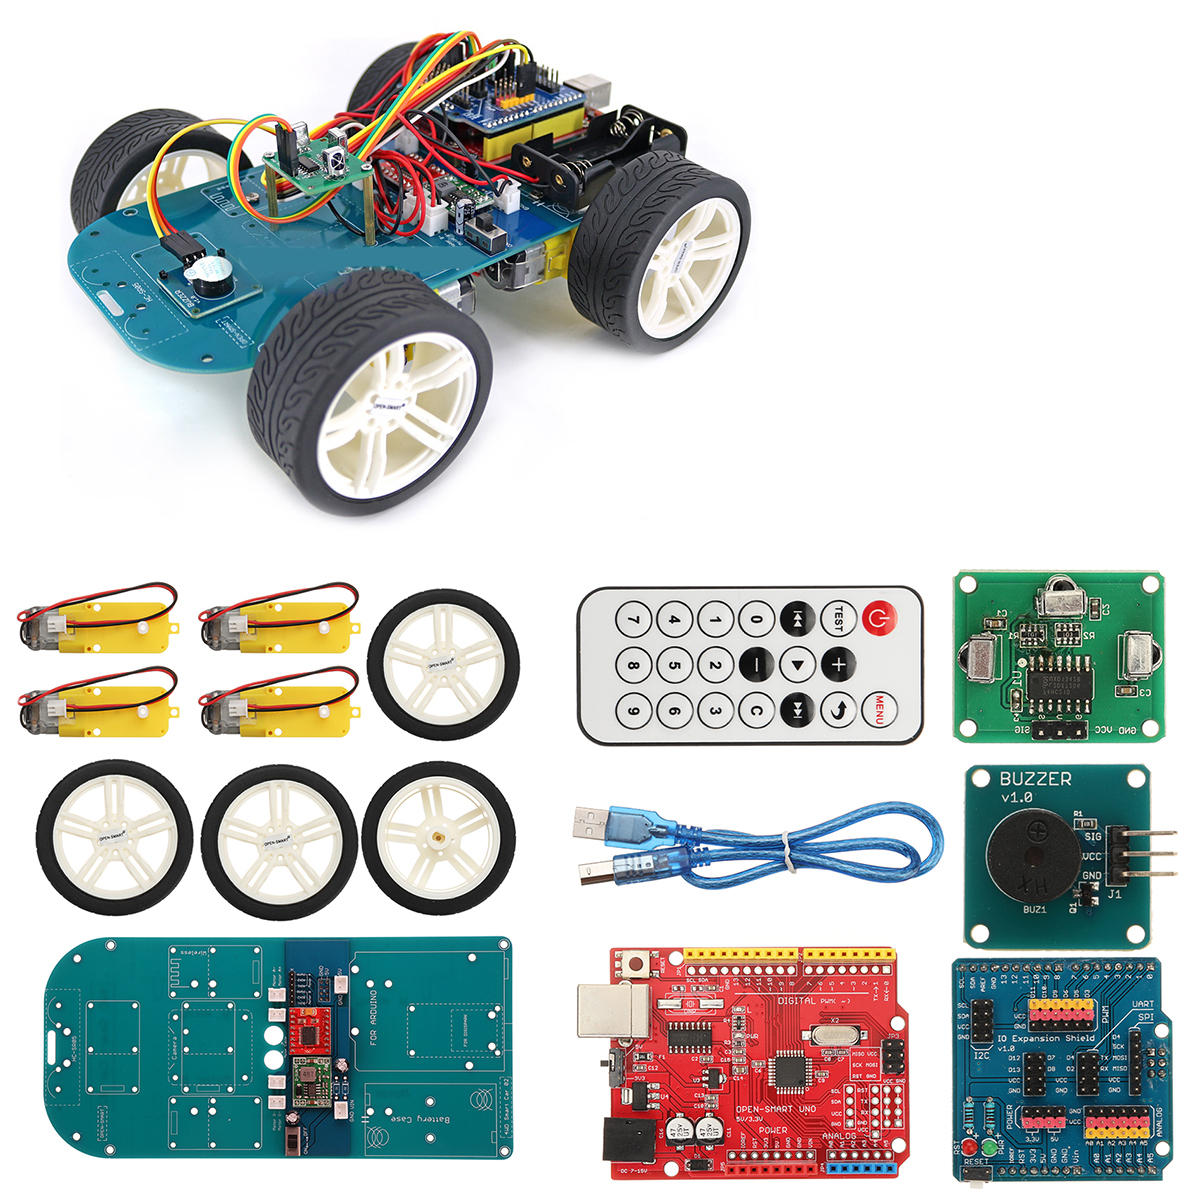 

4WD Wireless IR Remote Control Smart CarKit for ATmega328P UNO R3 with IR Controller/UNO R3 Motherboard/TT Motor